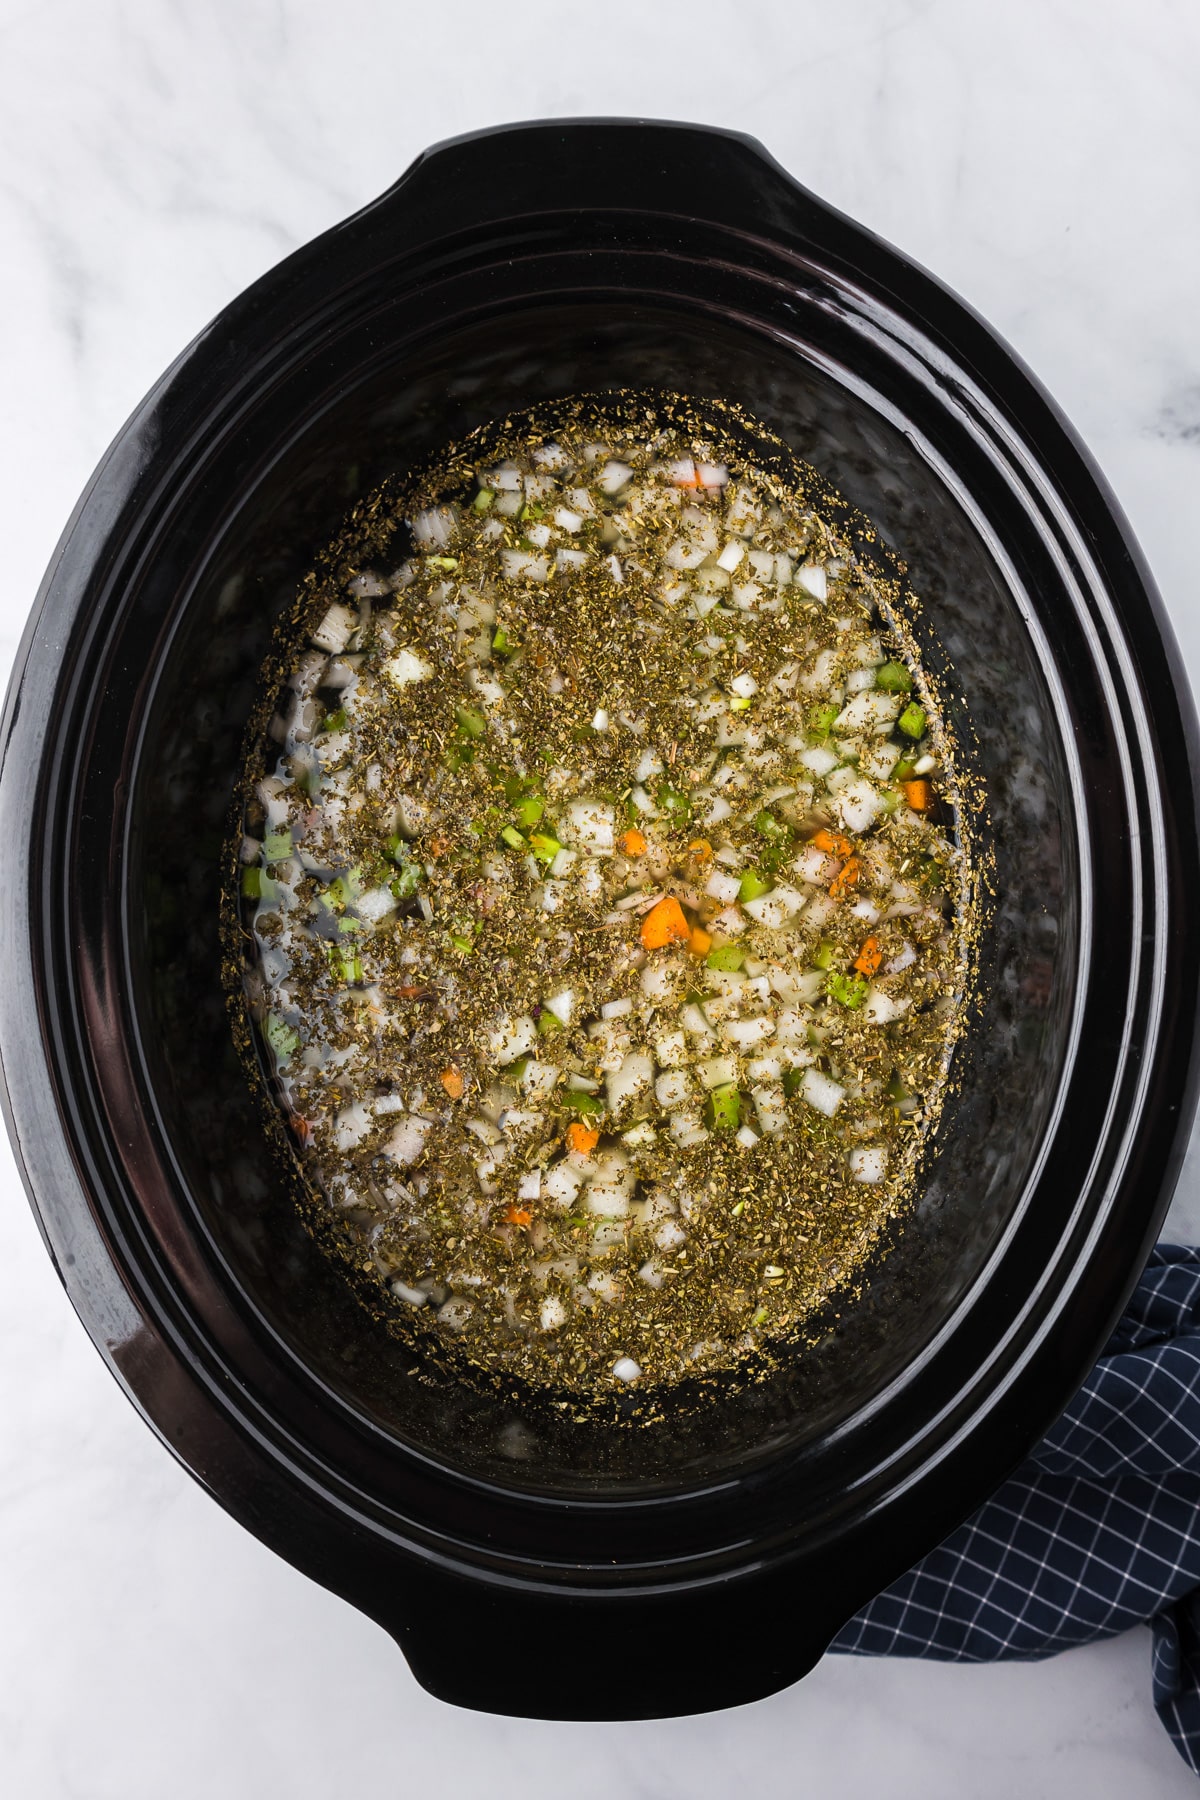 A crock pot filled with soup, vegetables and herbs for chicken gnocchi soup.